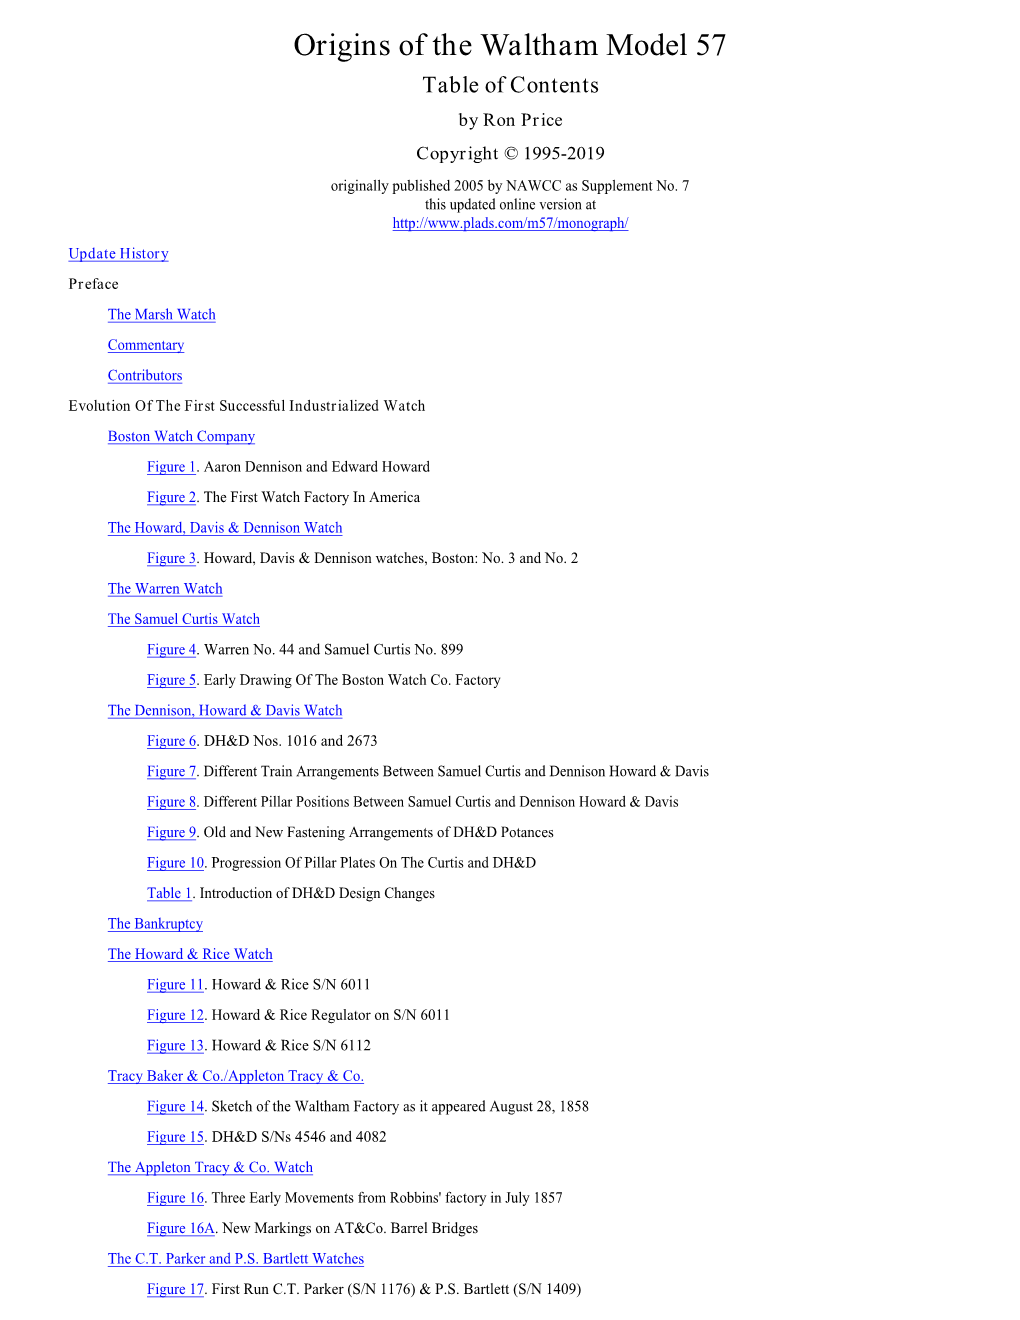 Origins of the Waltham Model 57 Table of Contents by Ron Price Copyright © 1995-2019 Originally Published 2005 by NAWCC As Supplement No